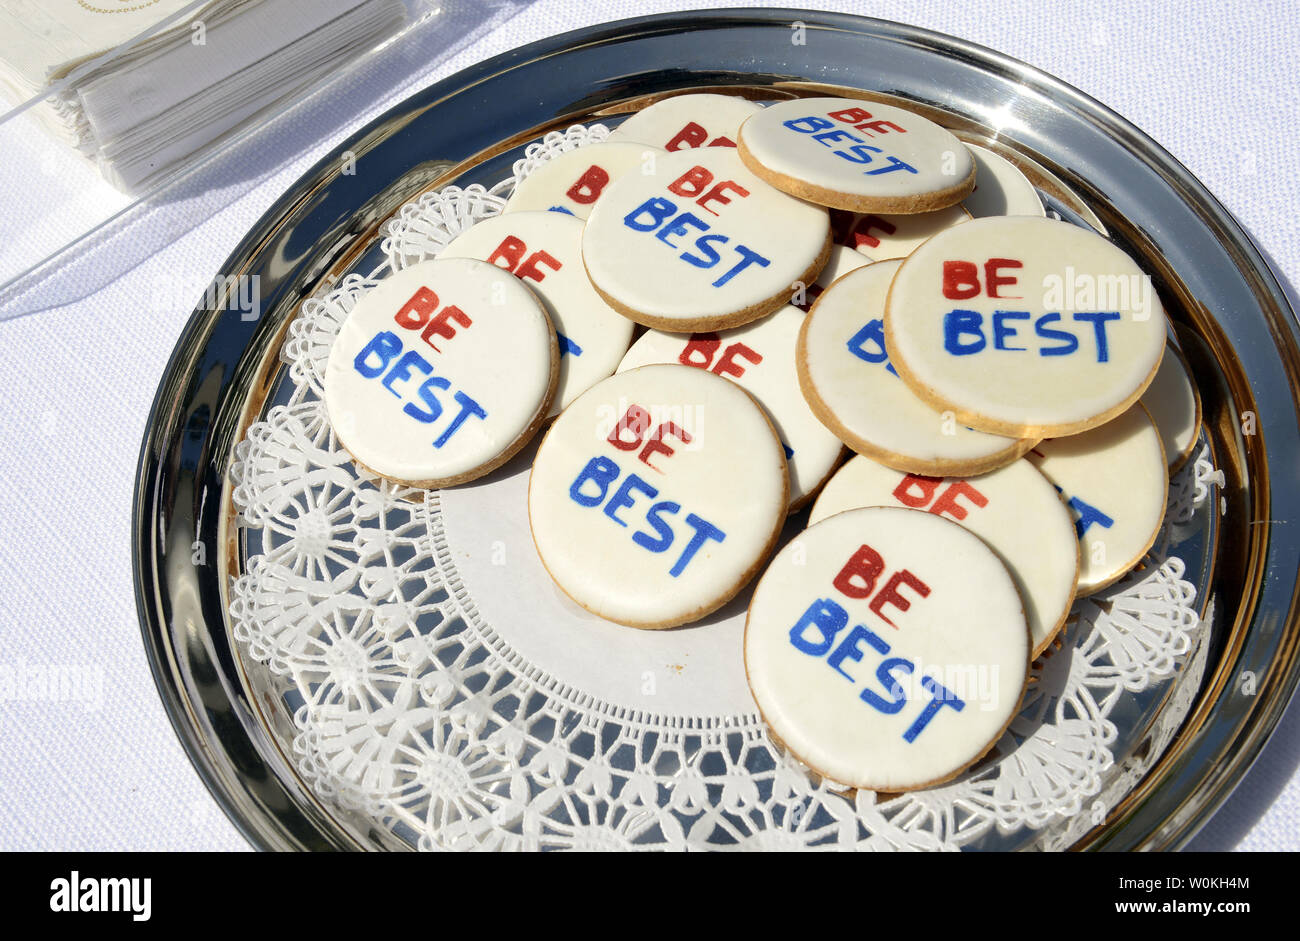 First Lady Melania Trump S Be Best Phrase Is On Cookies In The